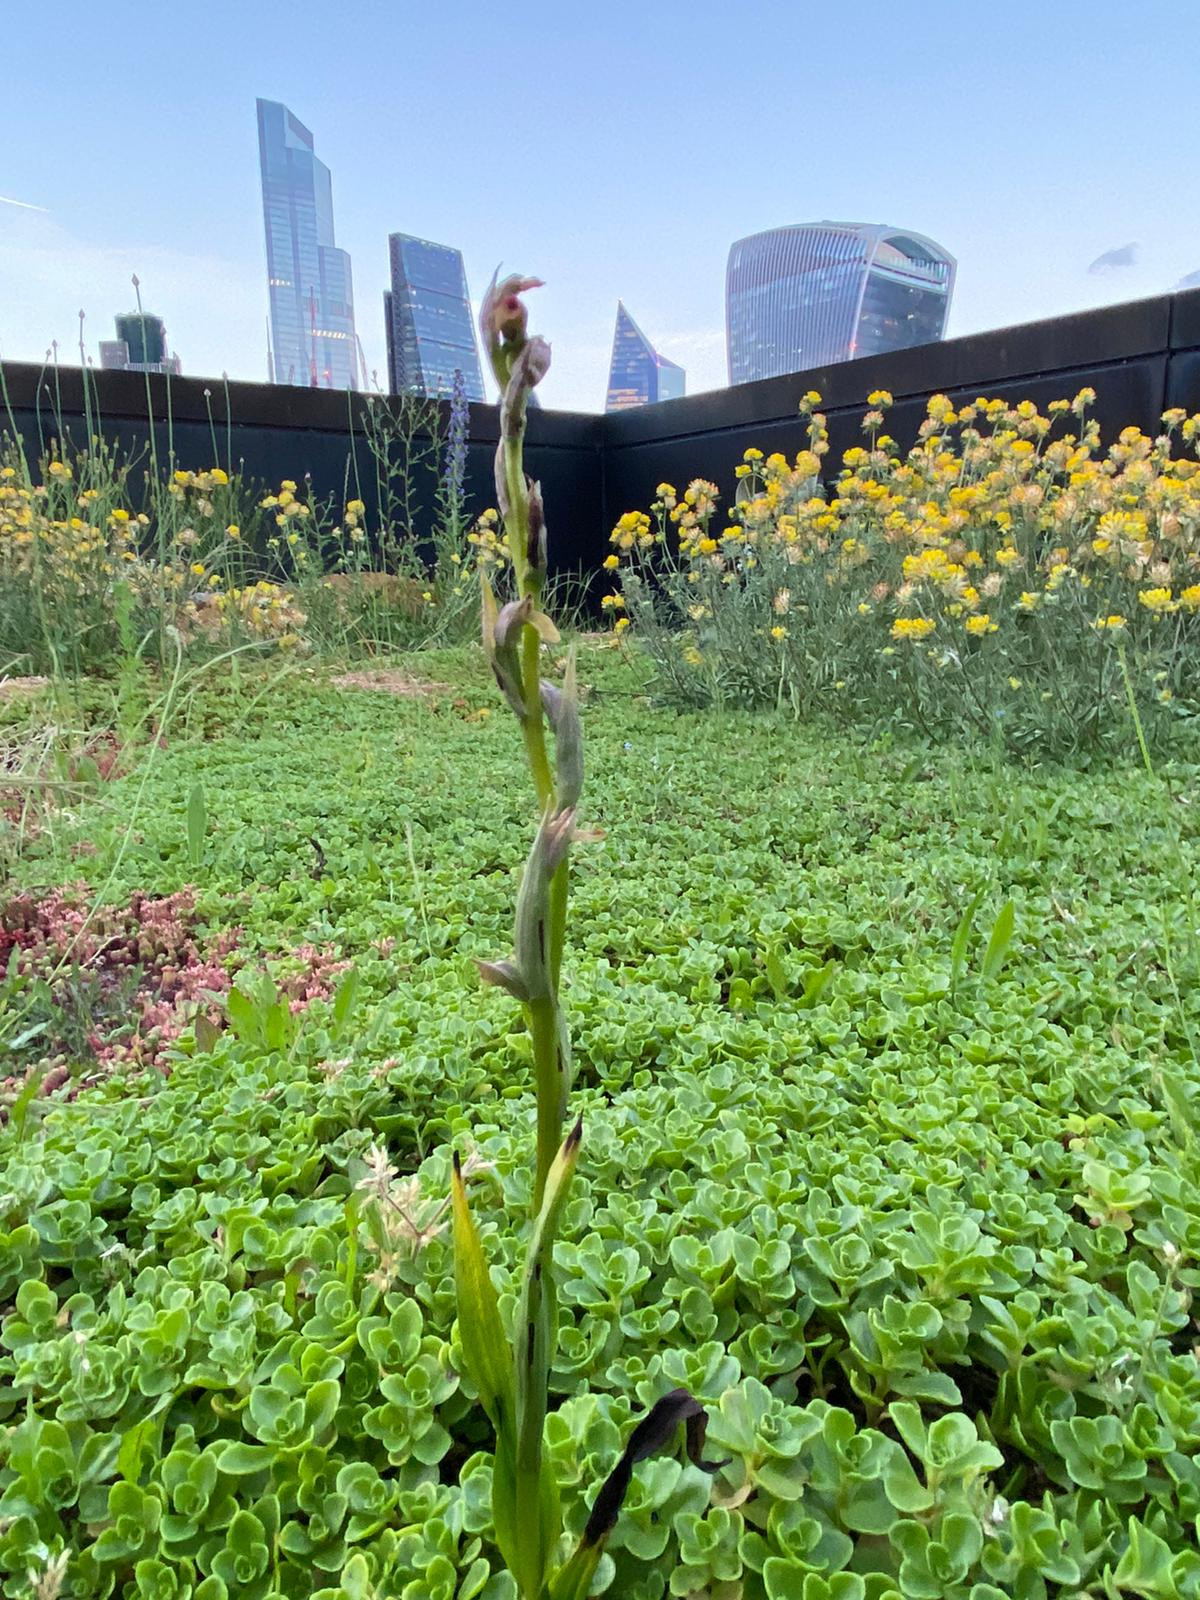 Rare orchids thought extinct in UK found growing in London rooftop garden